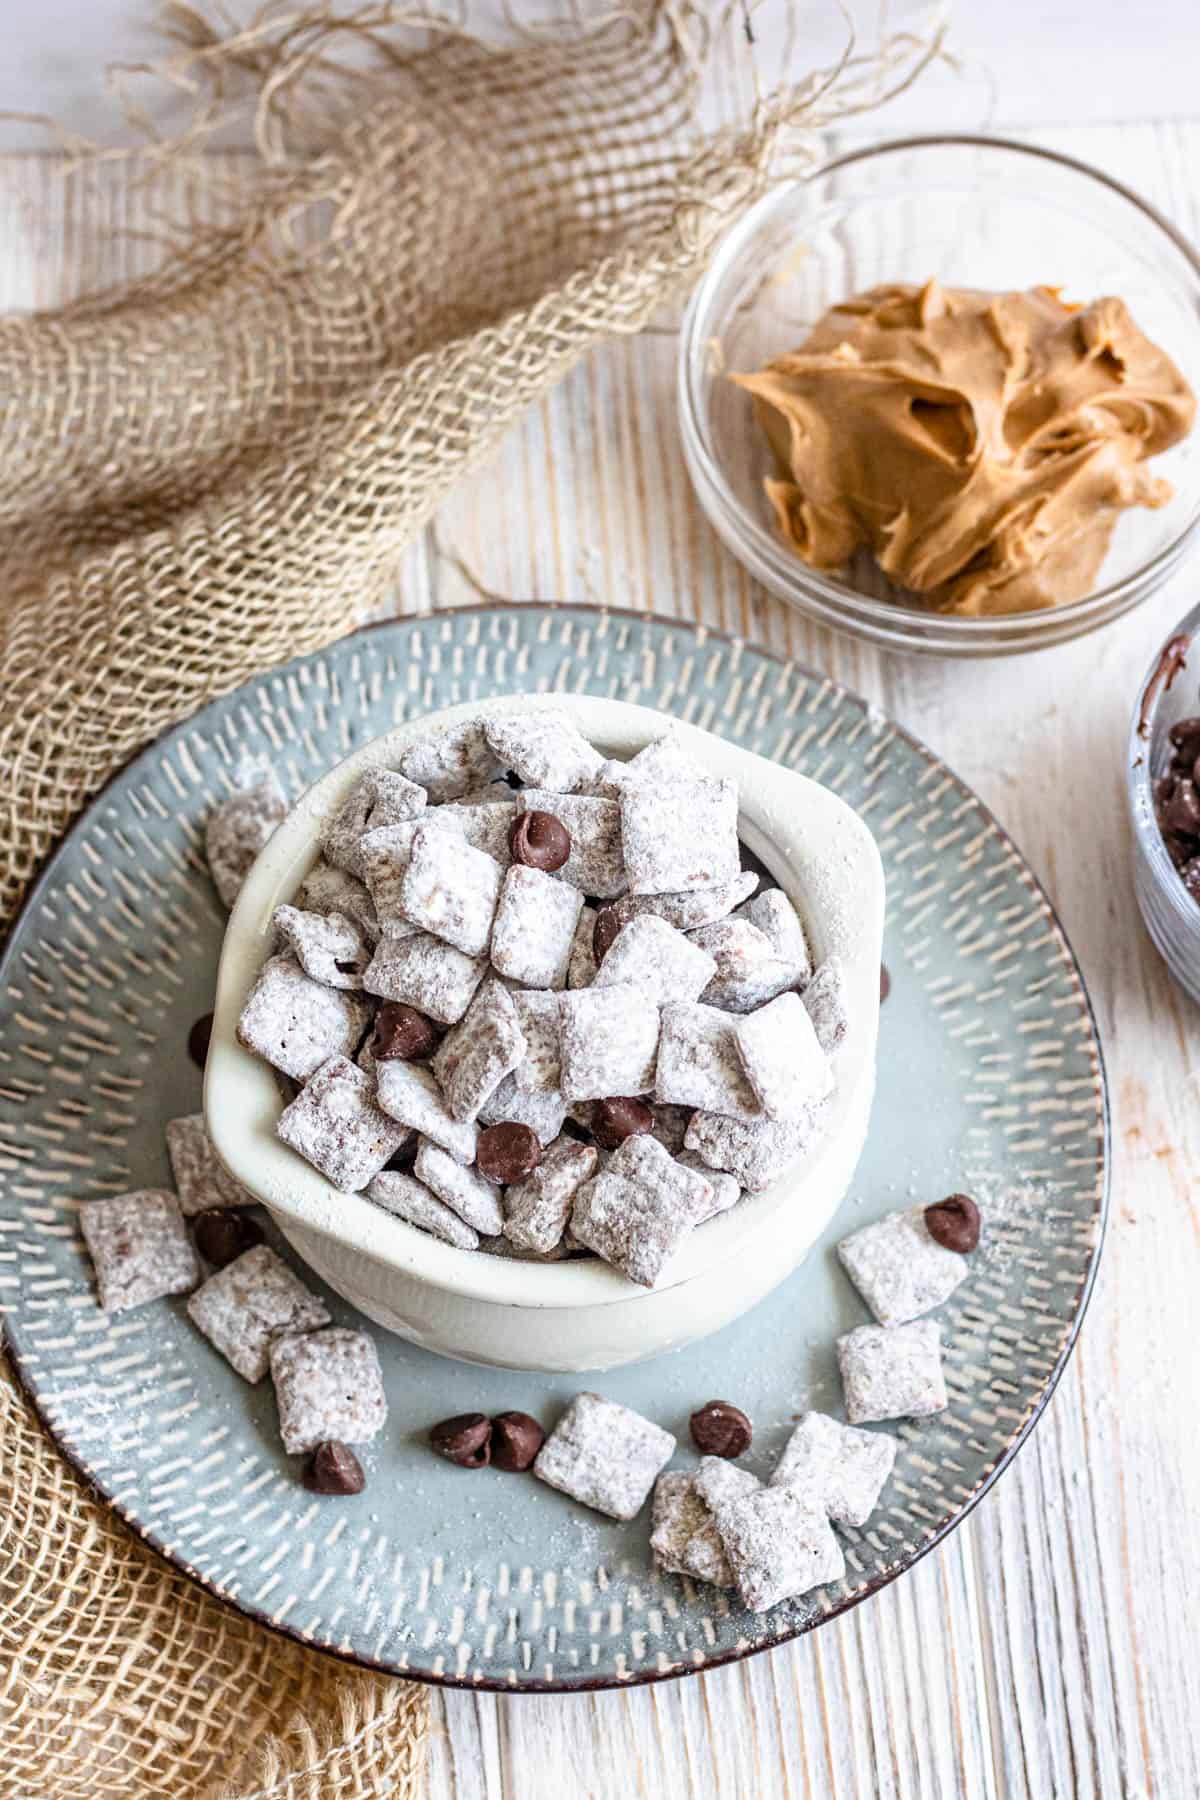 Bowl of puppy chow on a plate sprinkled with chocolate chips